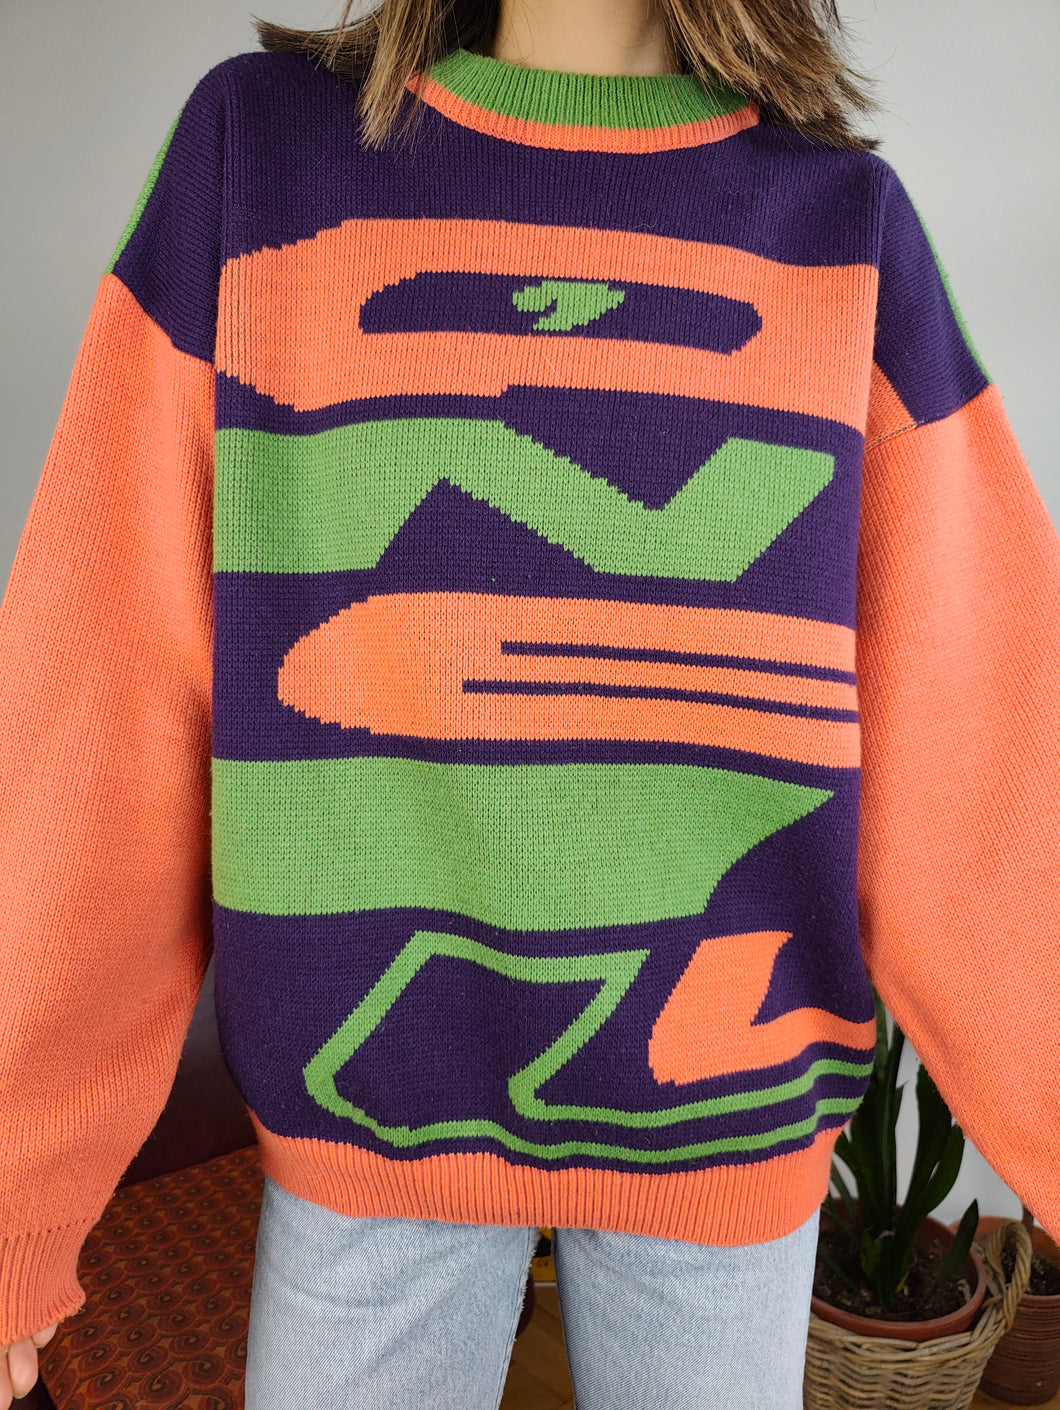 Vintage 90s RARE O'Neill wool mix knit sweater orange green purple fall winter knitted pullover jumper unisex S-M